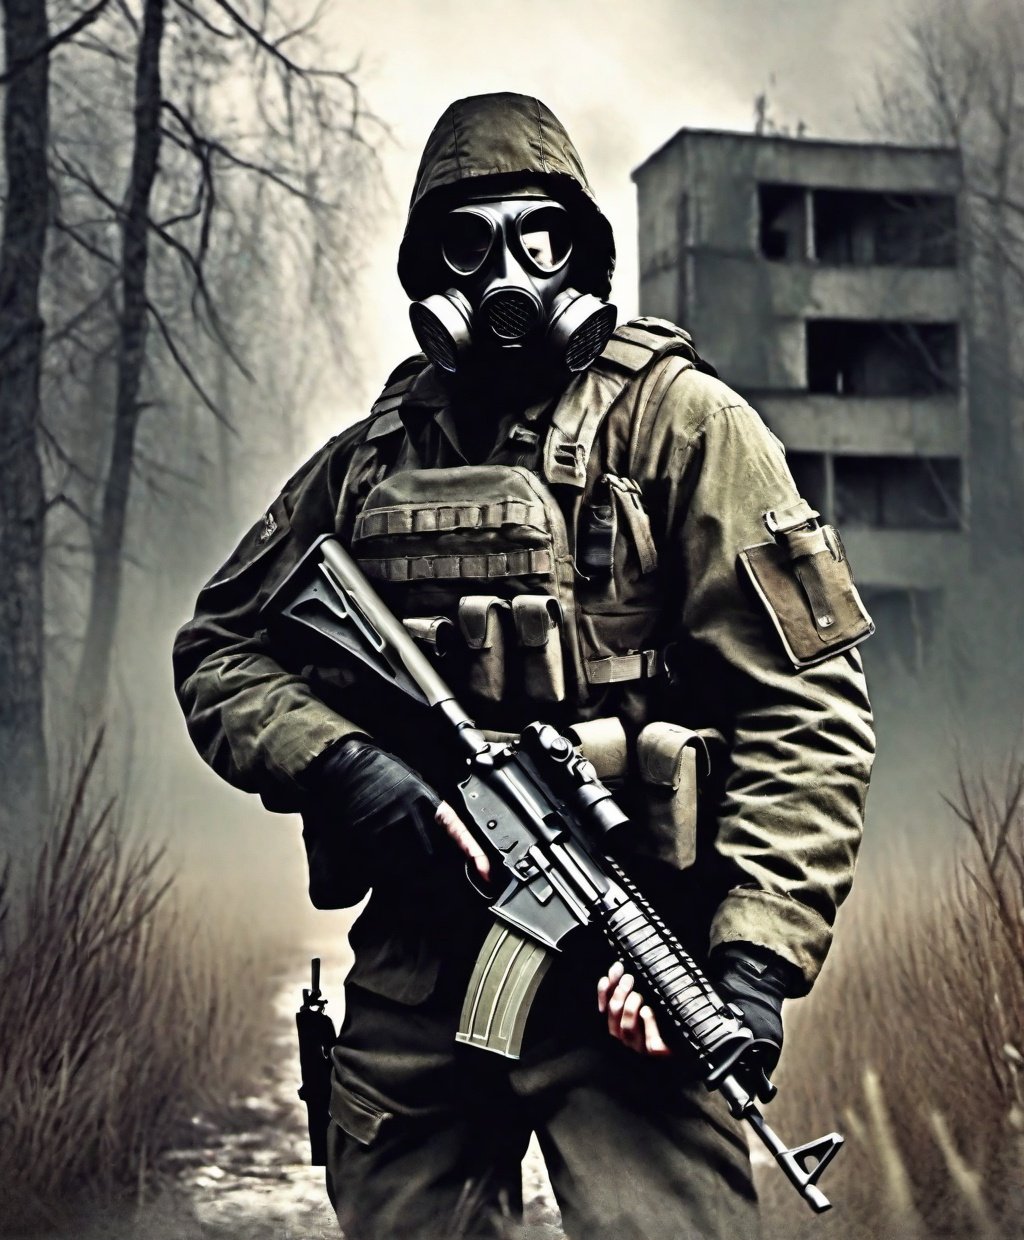 S.T.A.L.K.E.R. shadow of chernobyl, a stalker in mercenary gear and a gas mask, survivor, militaristic, holding a rifle, in the zone of exclusion, overgrown, expressive painting, somber mood, desaturated